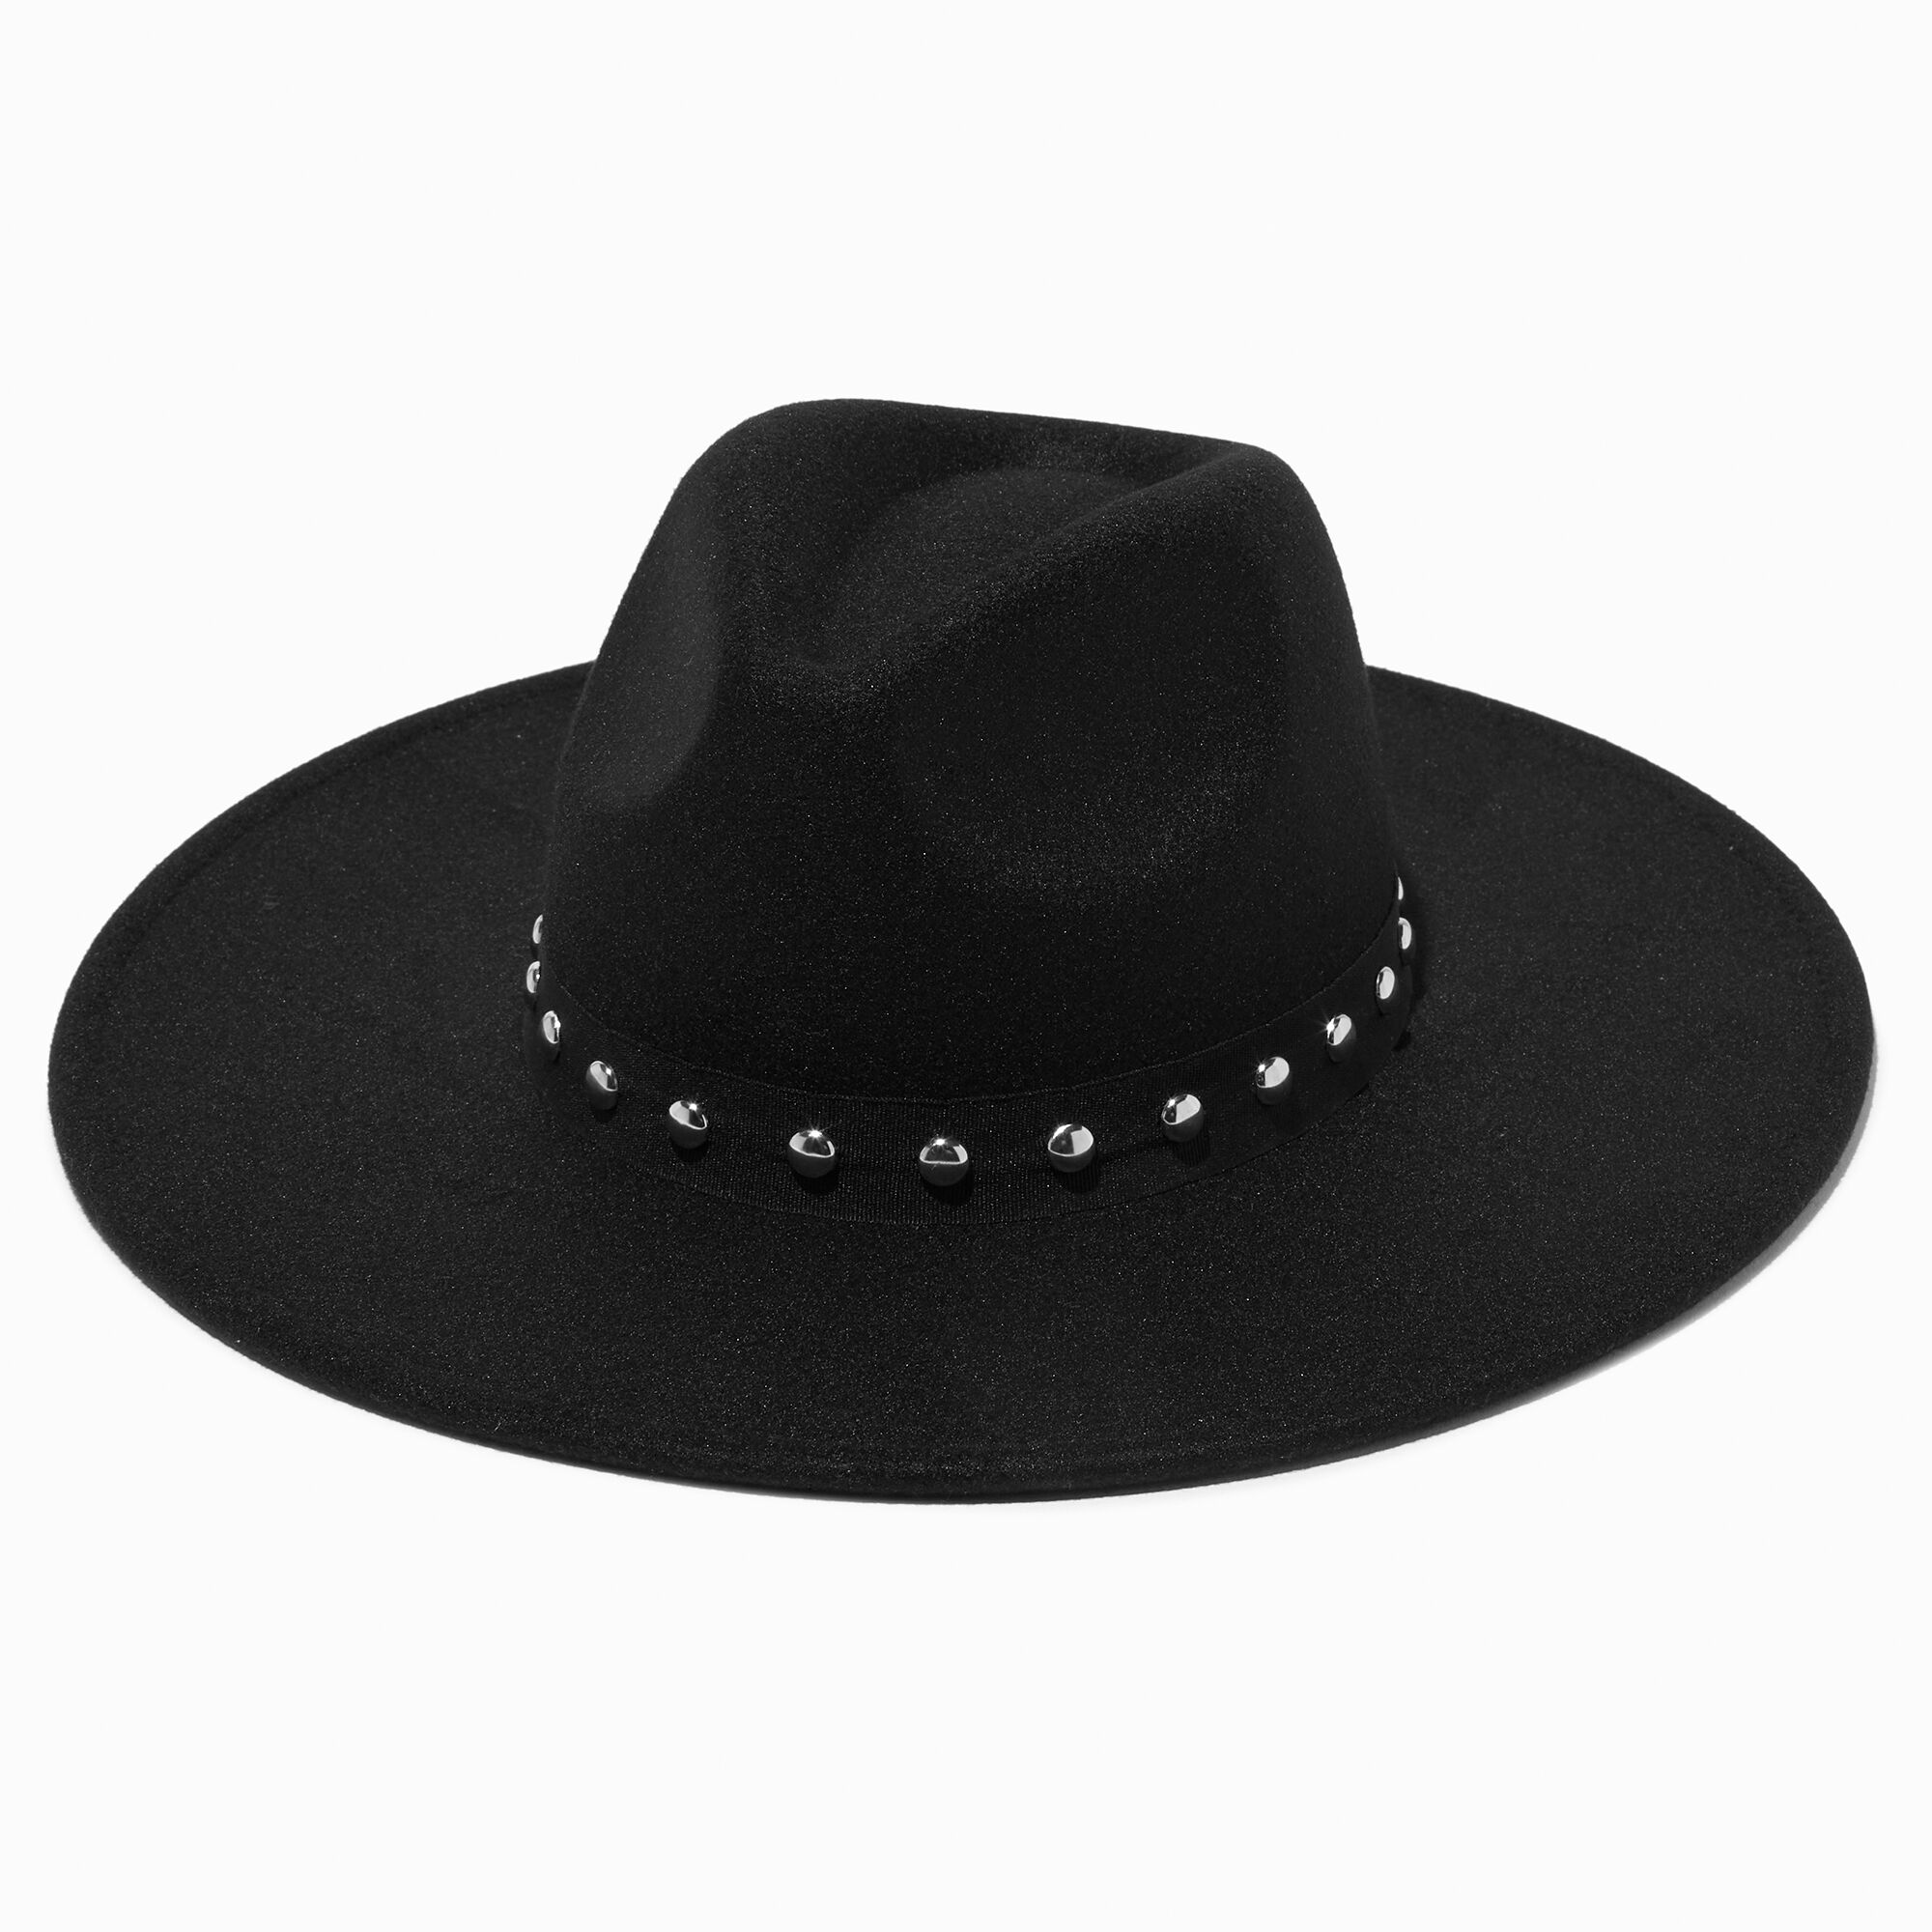 View Claires Silver Studded Cowboy Hat Black information